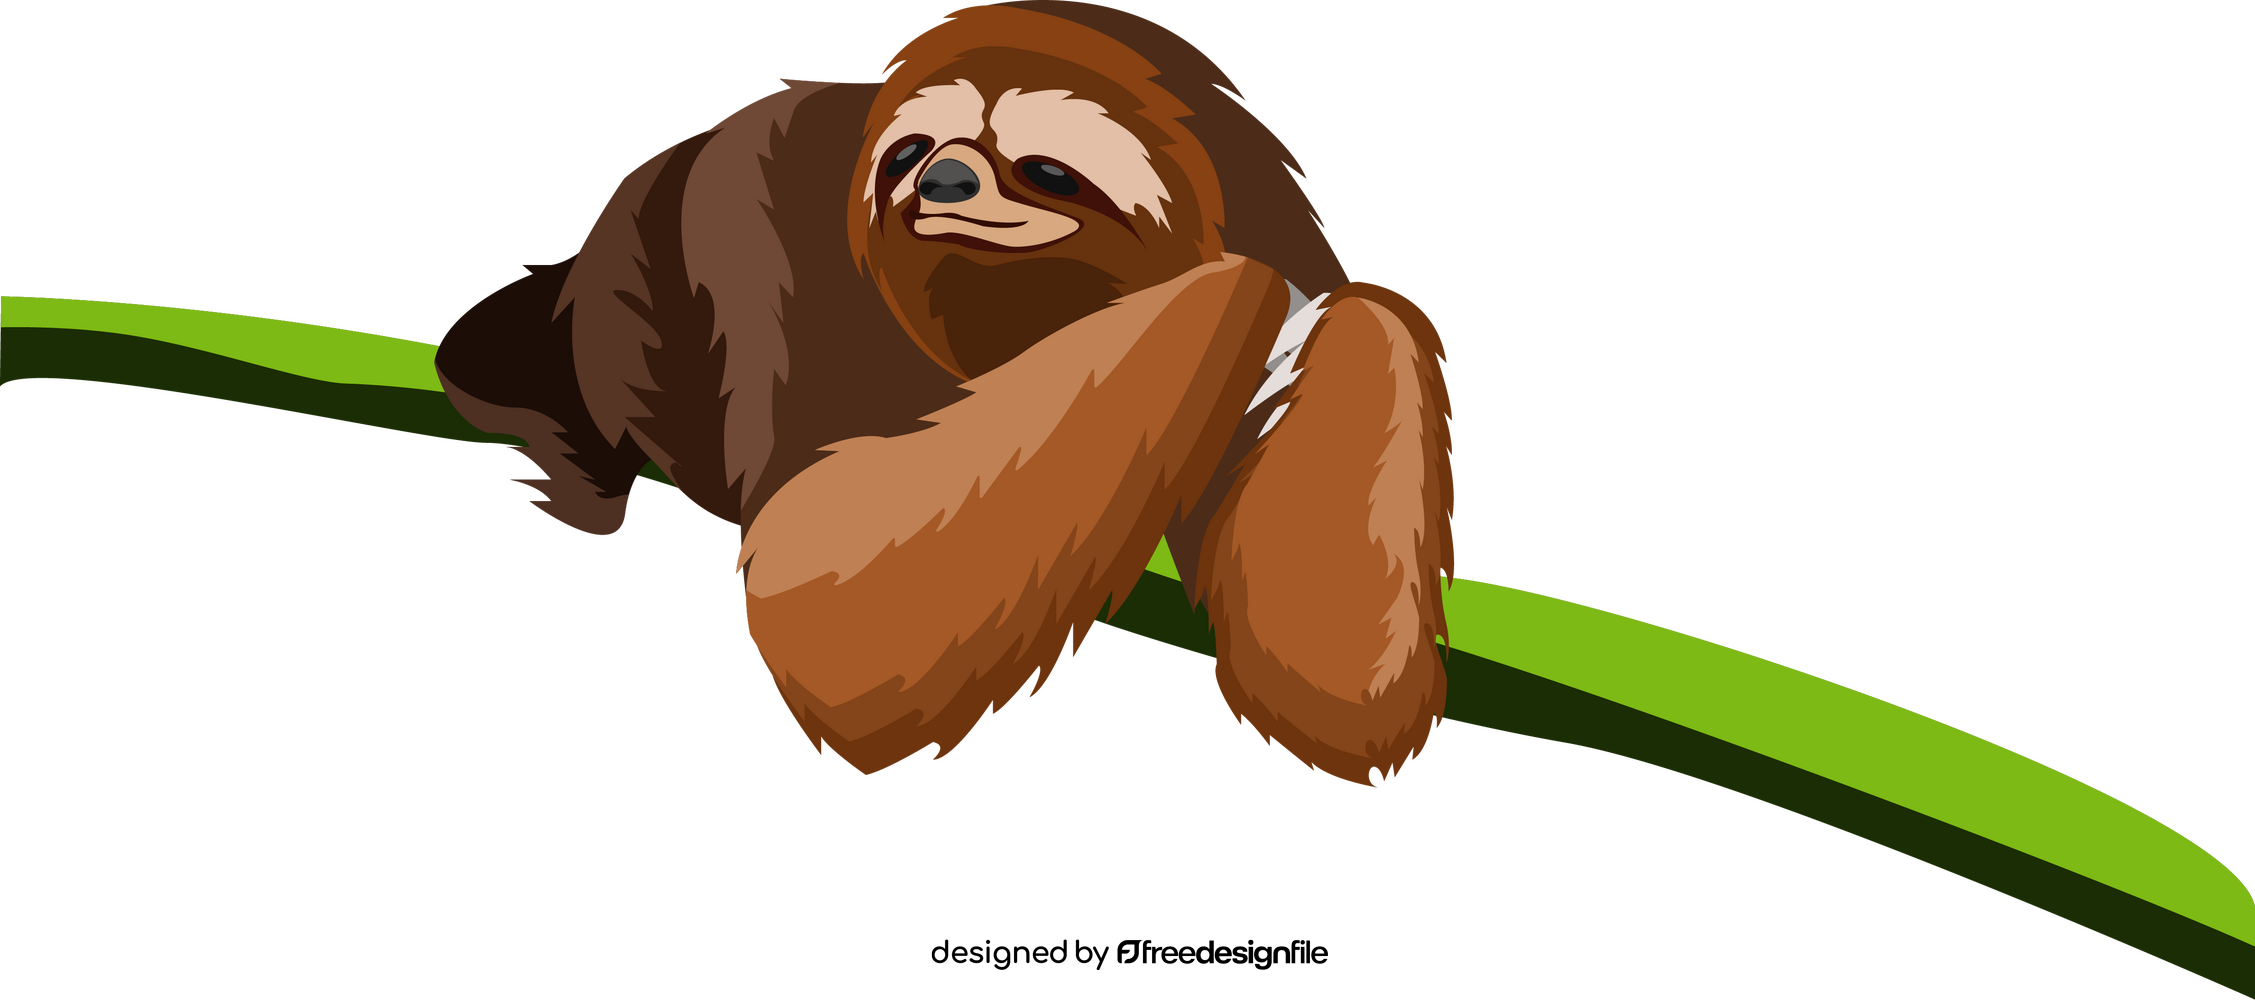 Sloth on a tree clipart